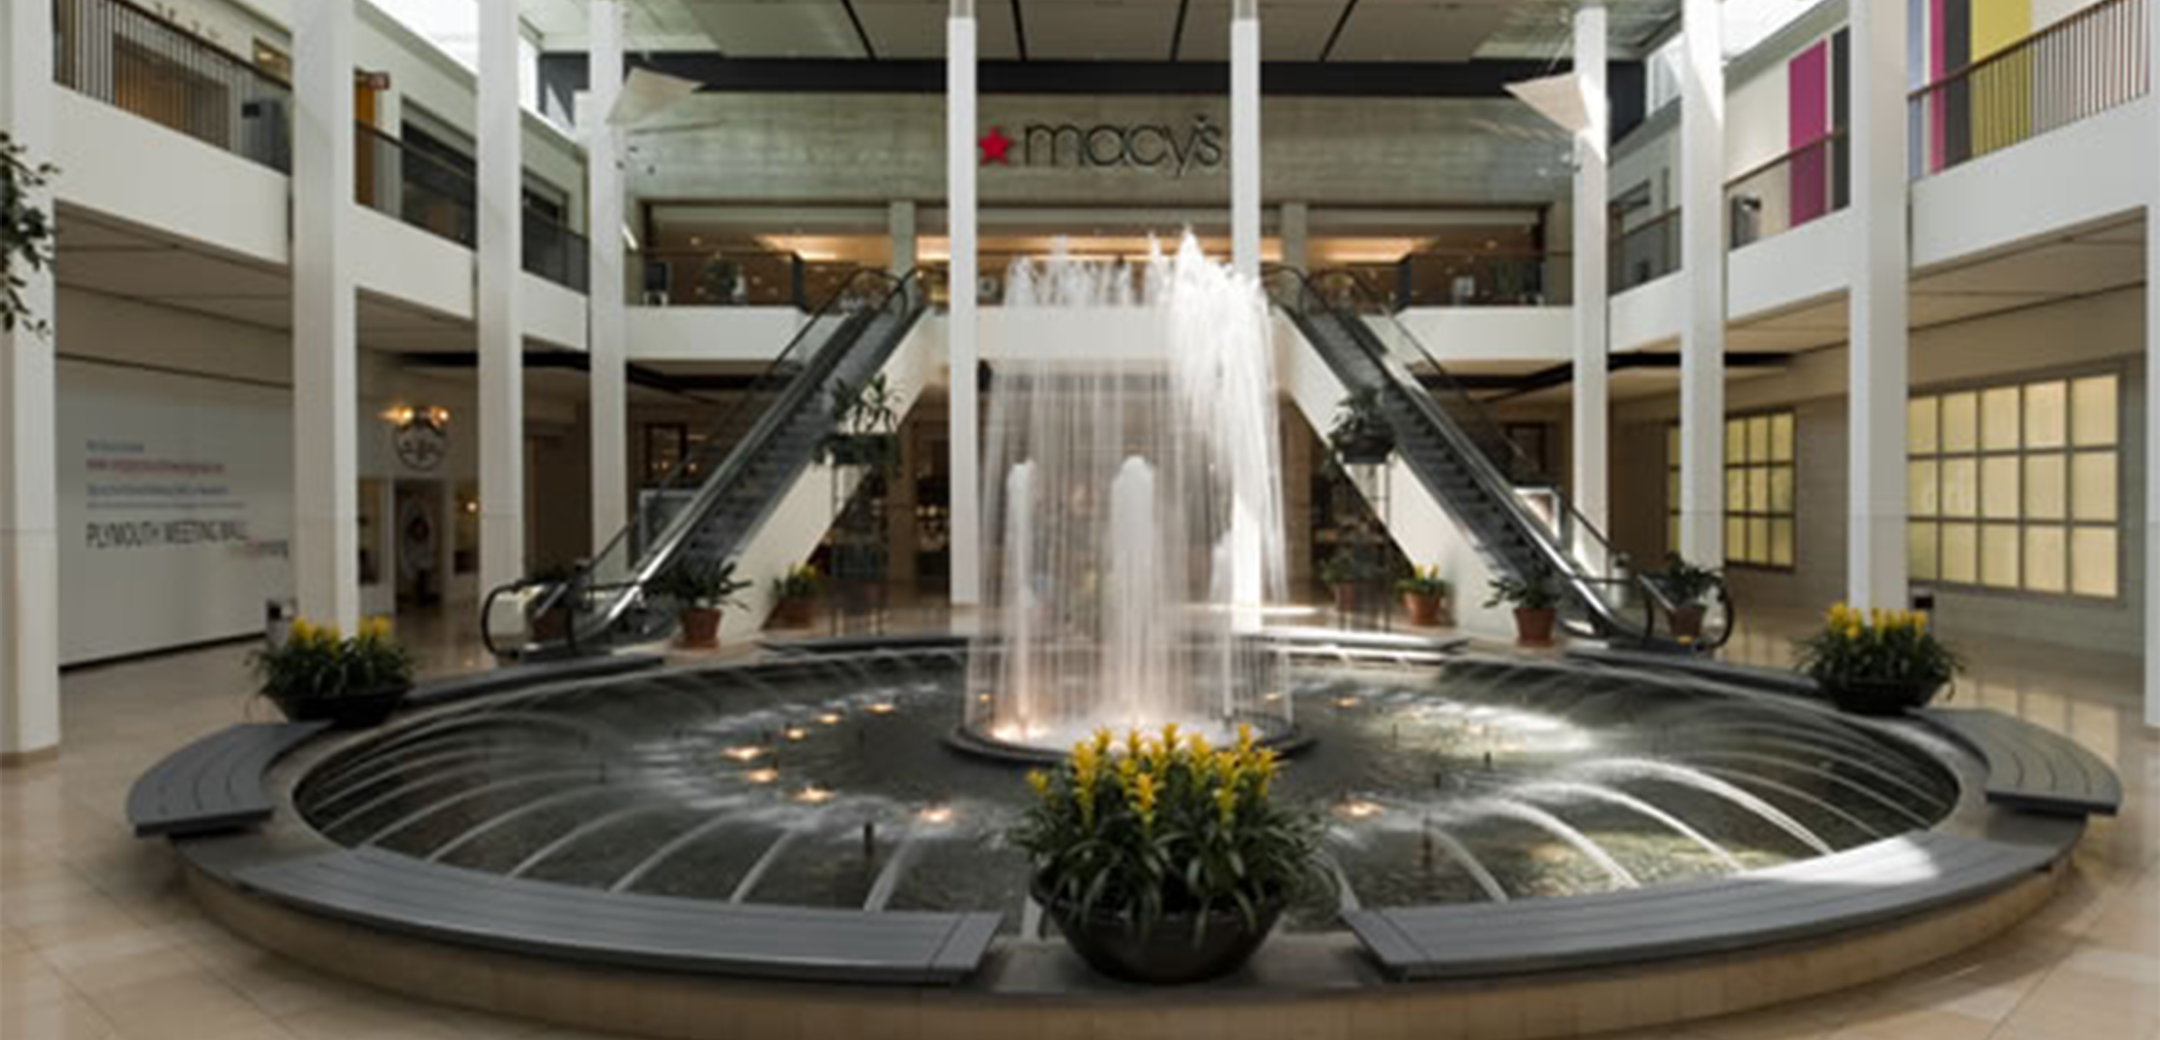 An interior close up view of the Plymouth Meeting Mall circular fountain with benches and flower pots on the edges and escalators in the background going up to the second floor.